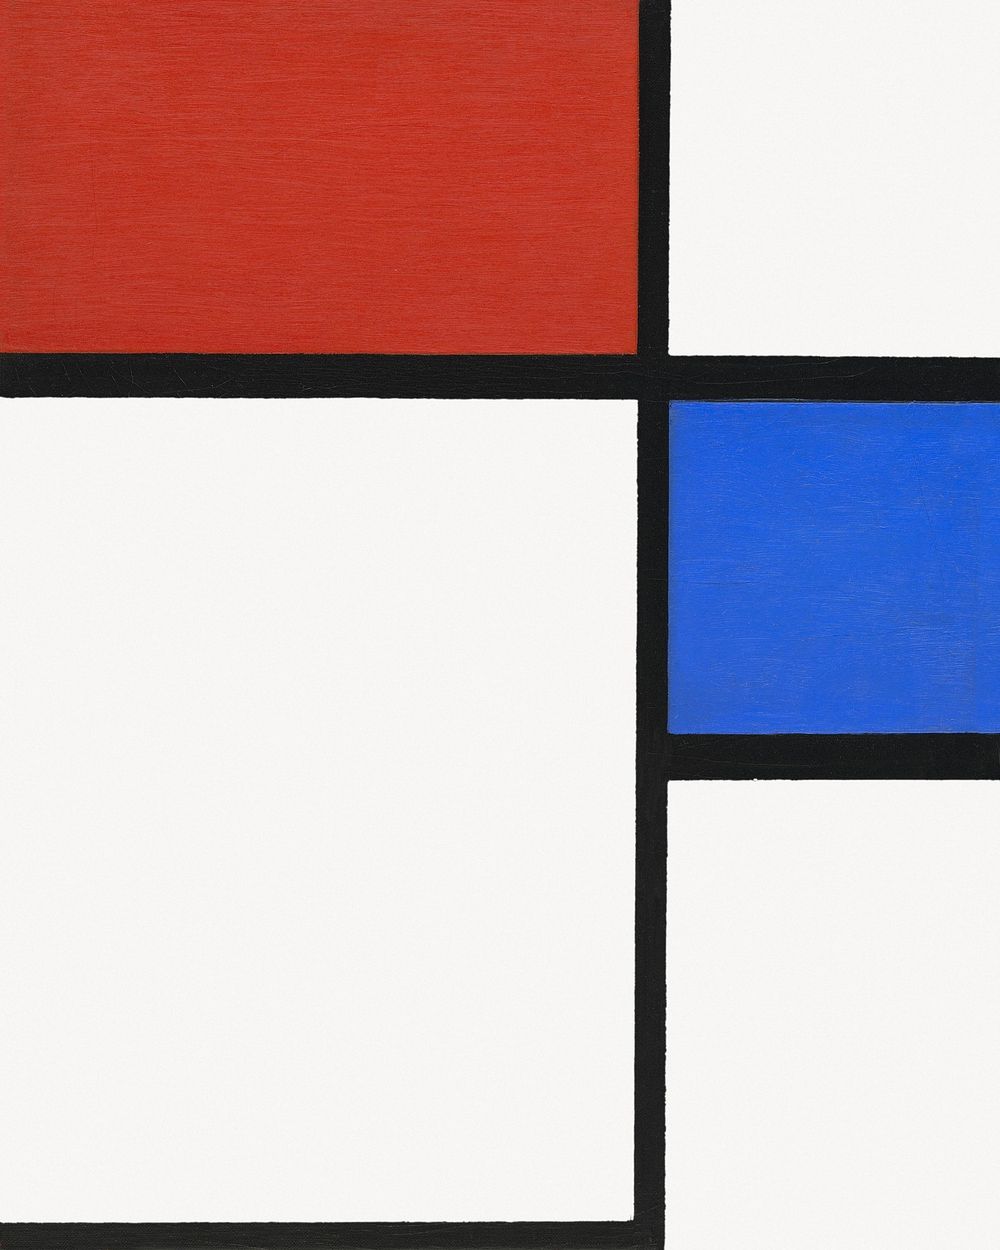 Piet Mondrian&rsquo;s Composition No. II, Cubism art. Remixed by rawpixel.